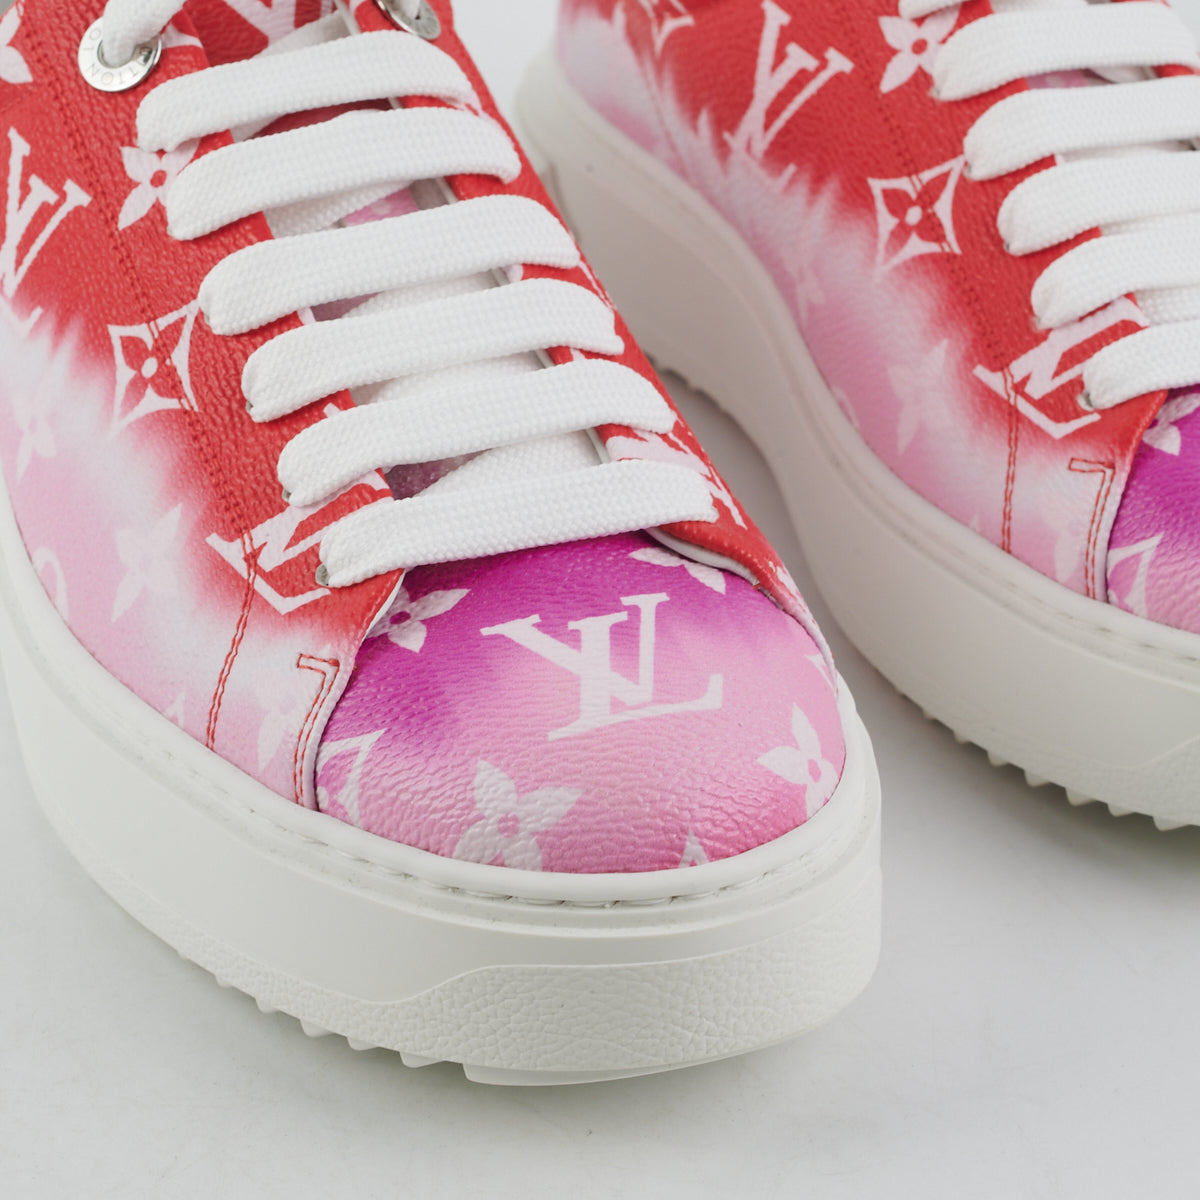 LV Louis Vuitton Time Out Monogram Pink Red White Sneakers